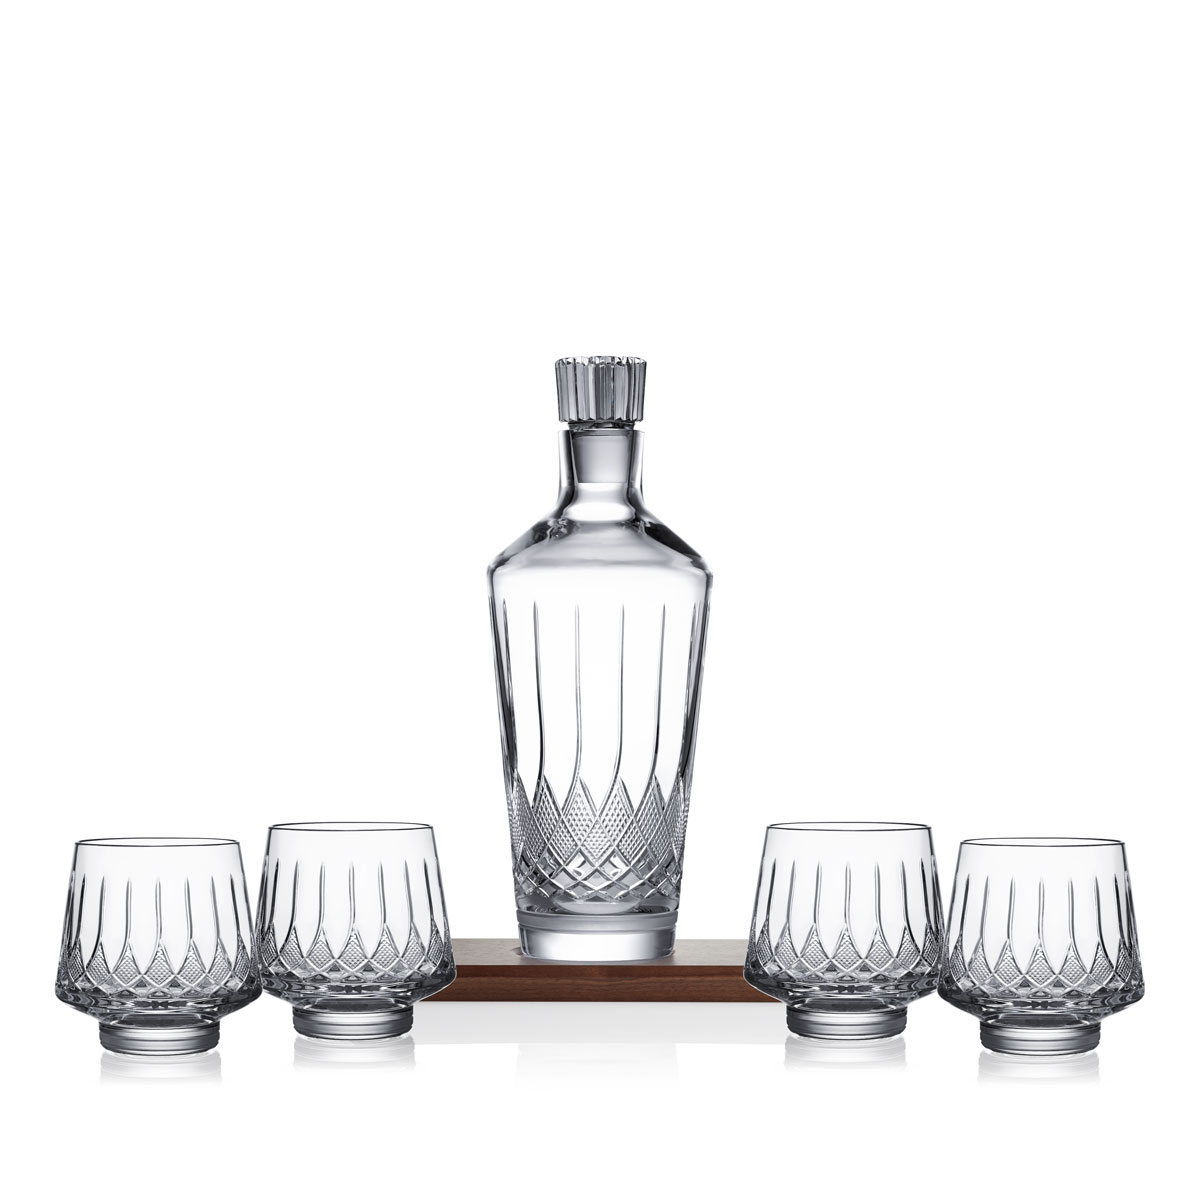 Waterford Lismore Arcus 8 Piece Barware Set, Decanter, 4 Tumblers, 3 Wooden Trays, Limited Edition